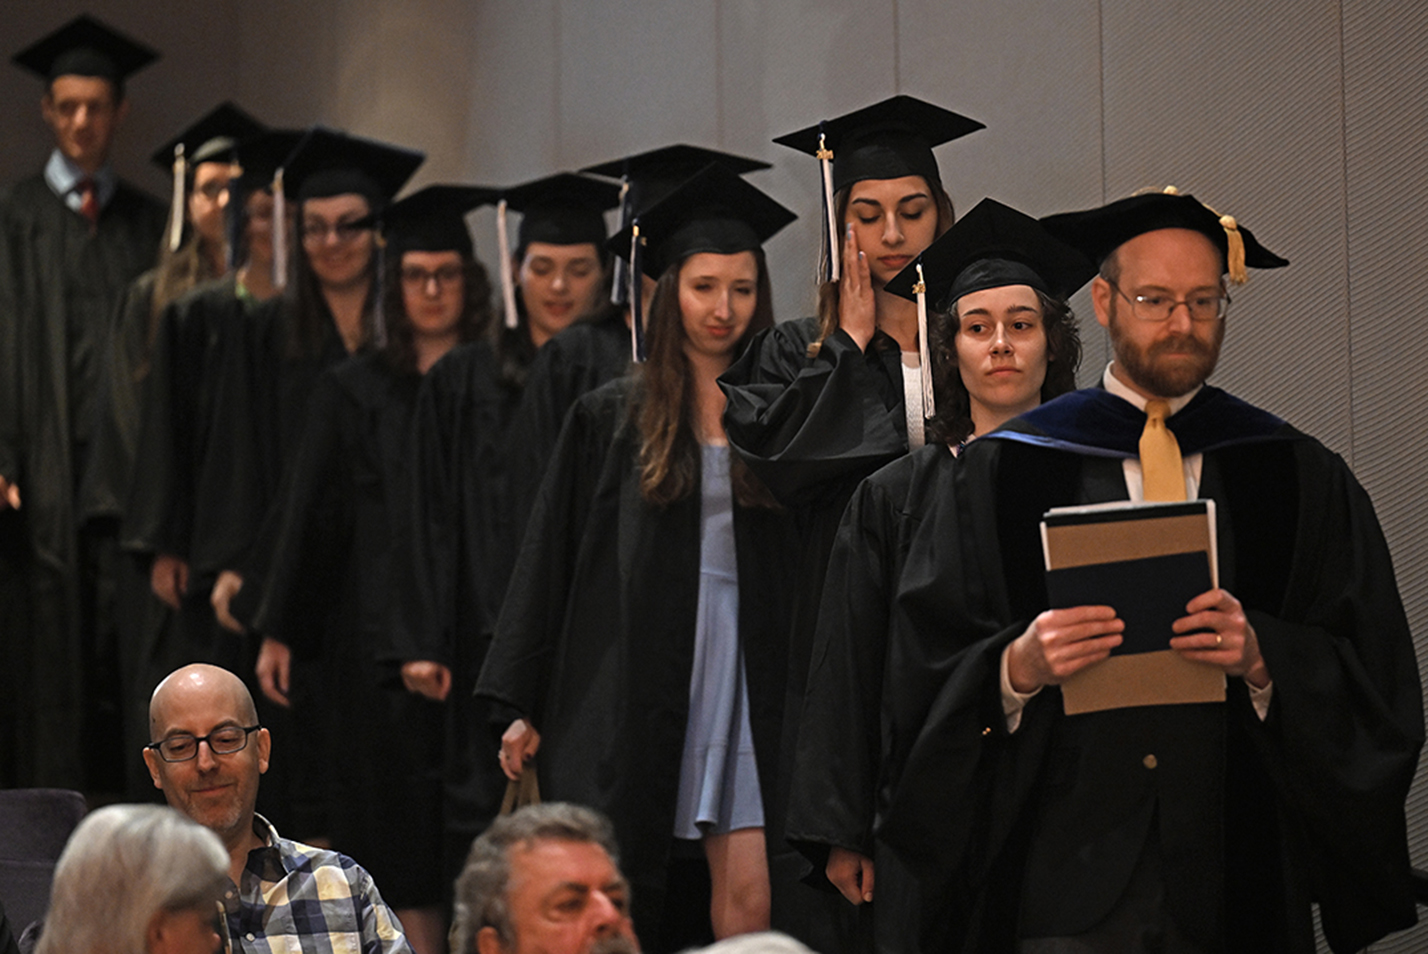 A professor leads a line of students in caps and gowns into a room for an honor society induction ceremony